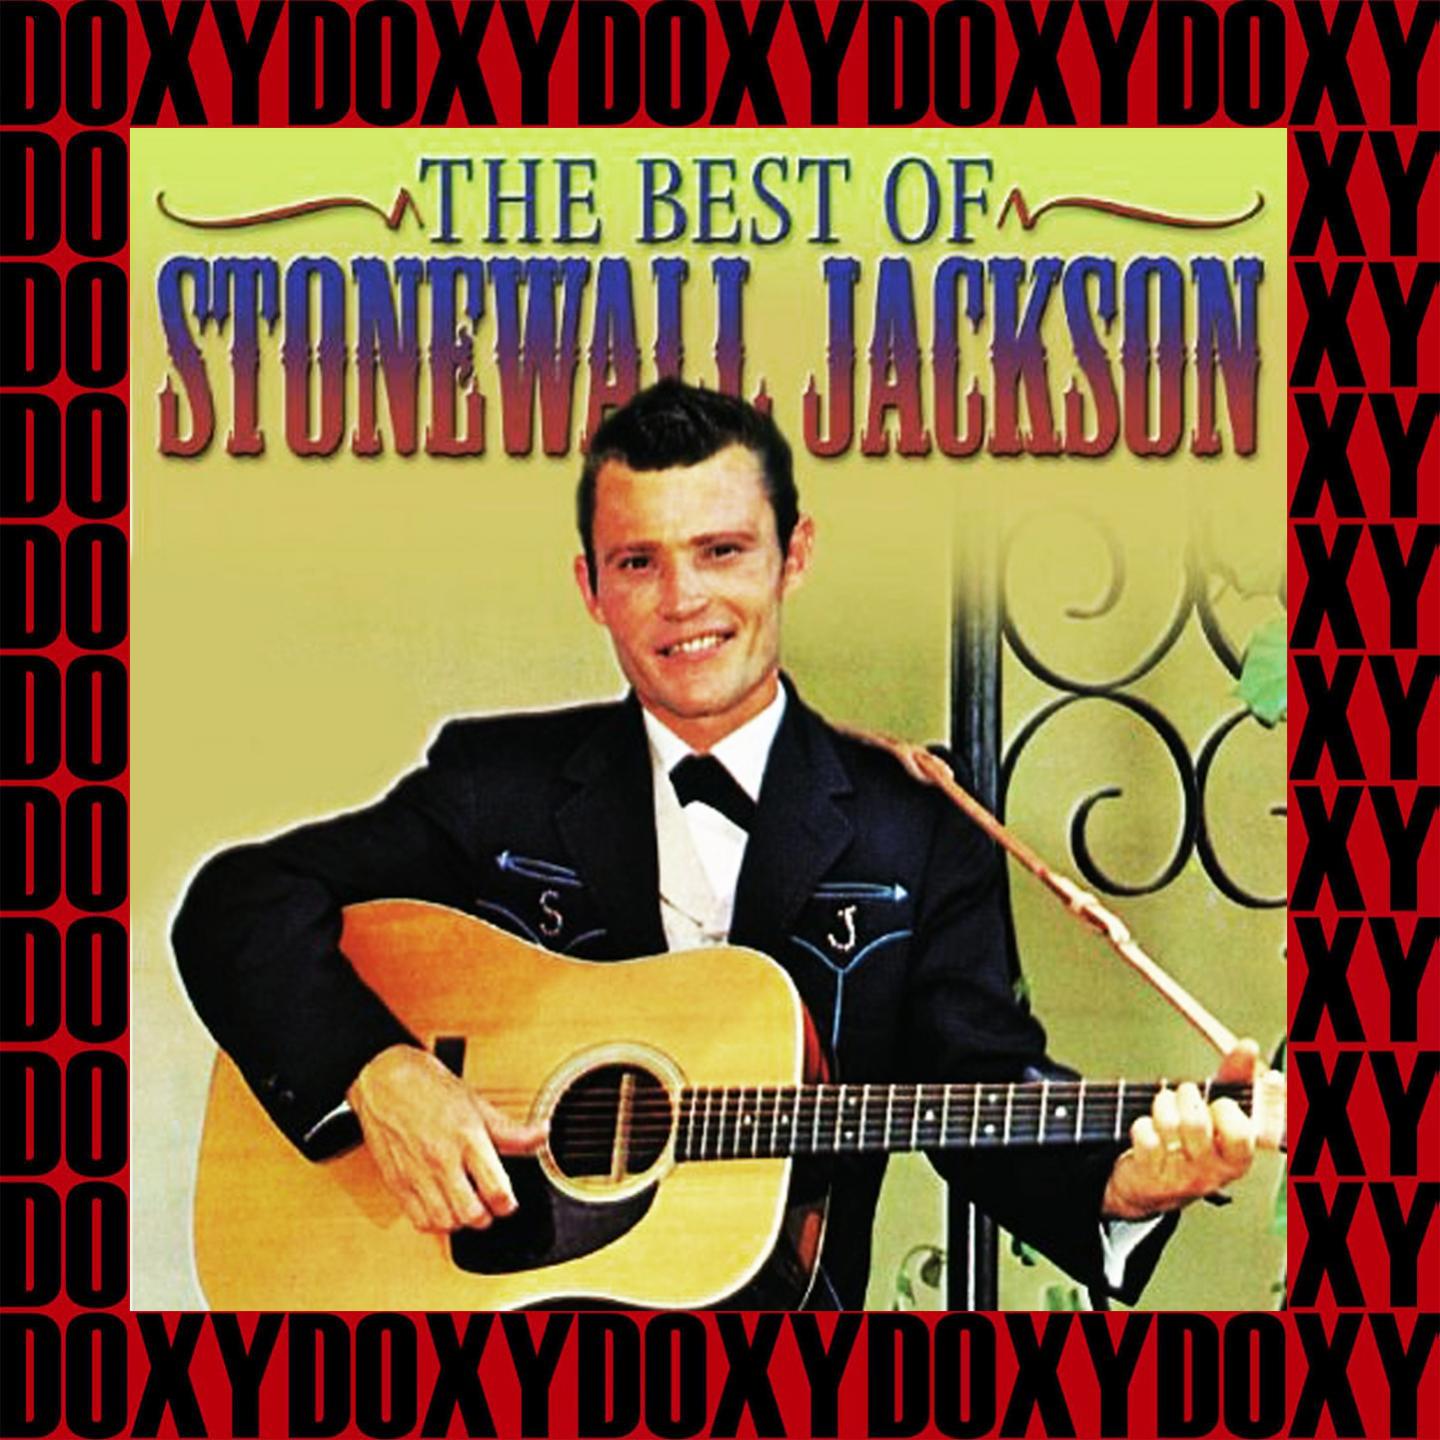 The Best of Stonewall Jackson (Remastered Version) (Doxy Collection)